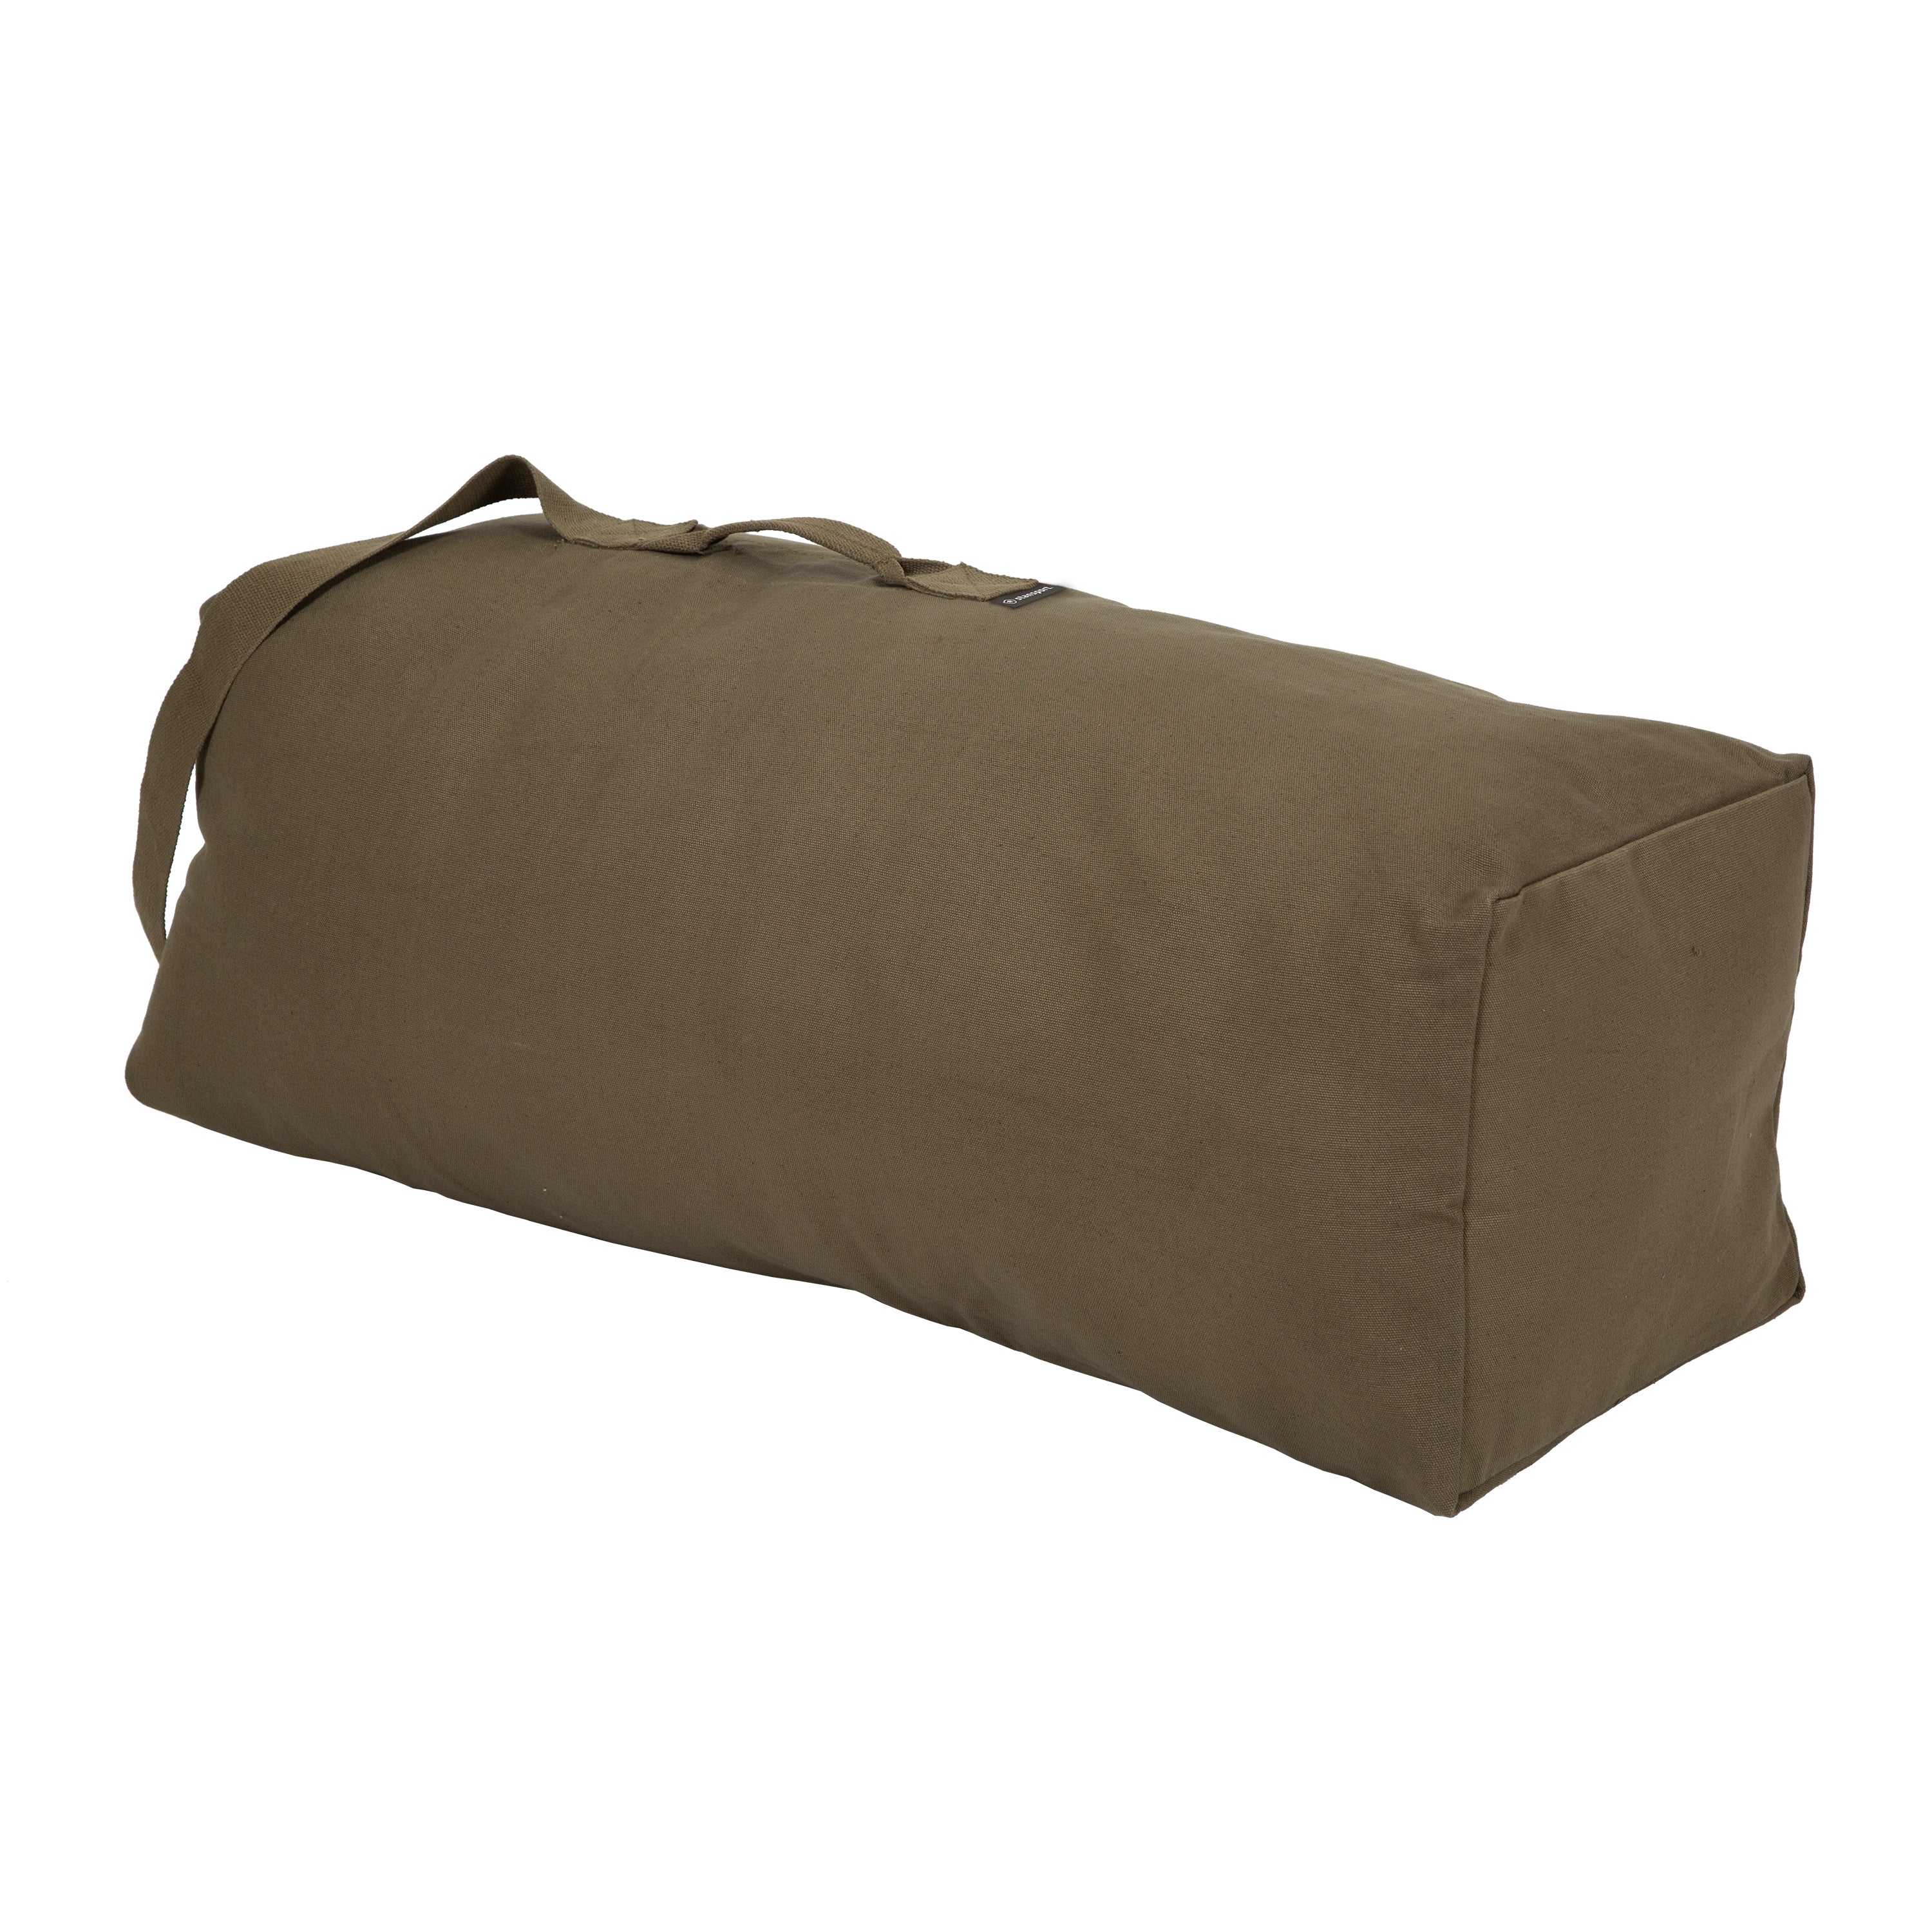 Duffel Bag With Strap - O.D. - 50 In X 14.5 In X 14.5 In